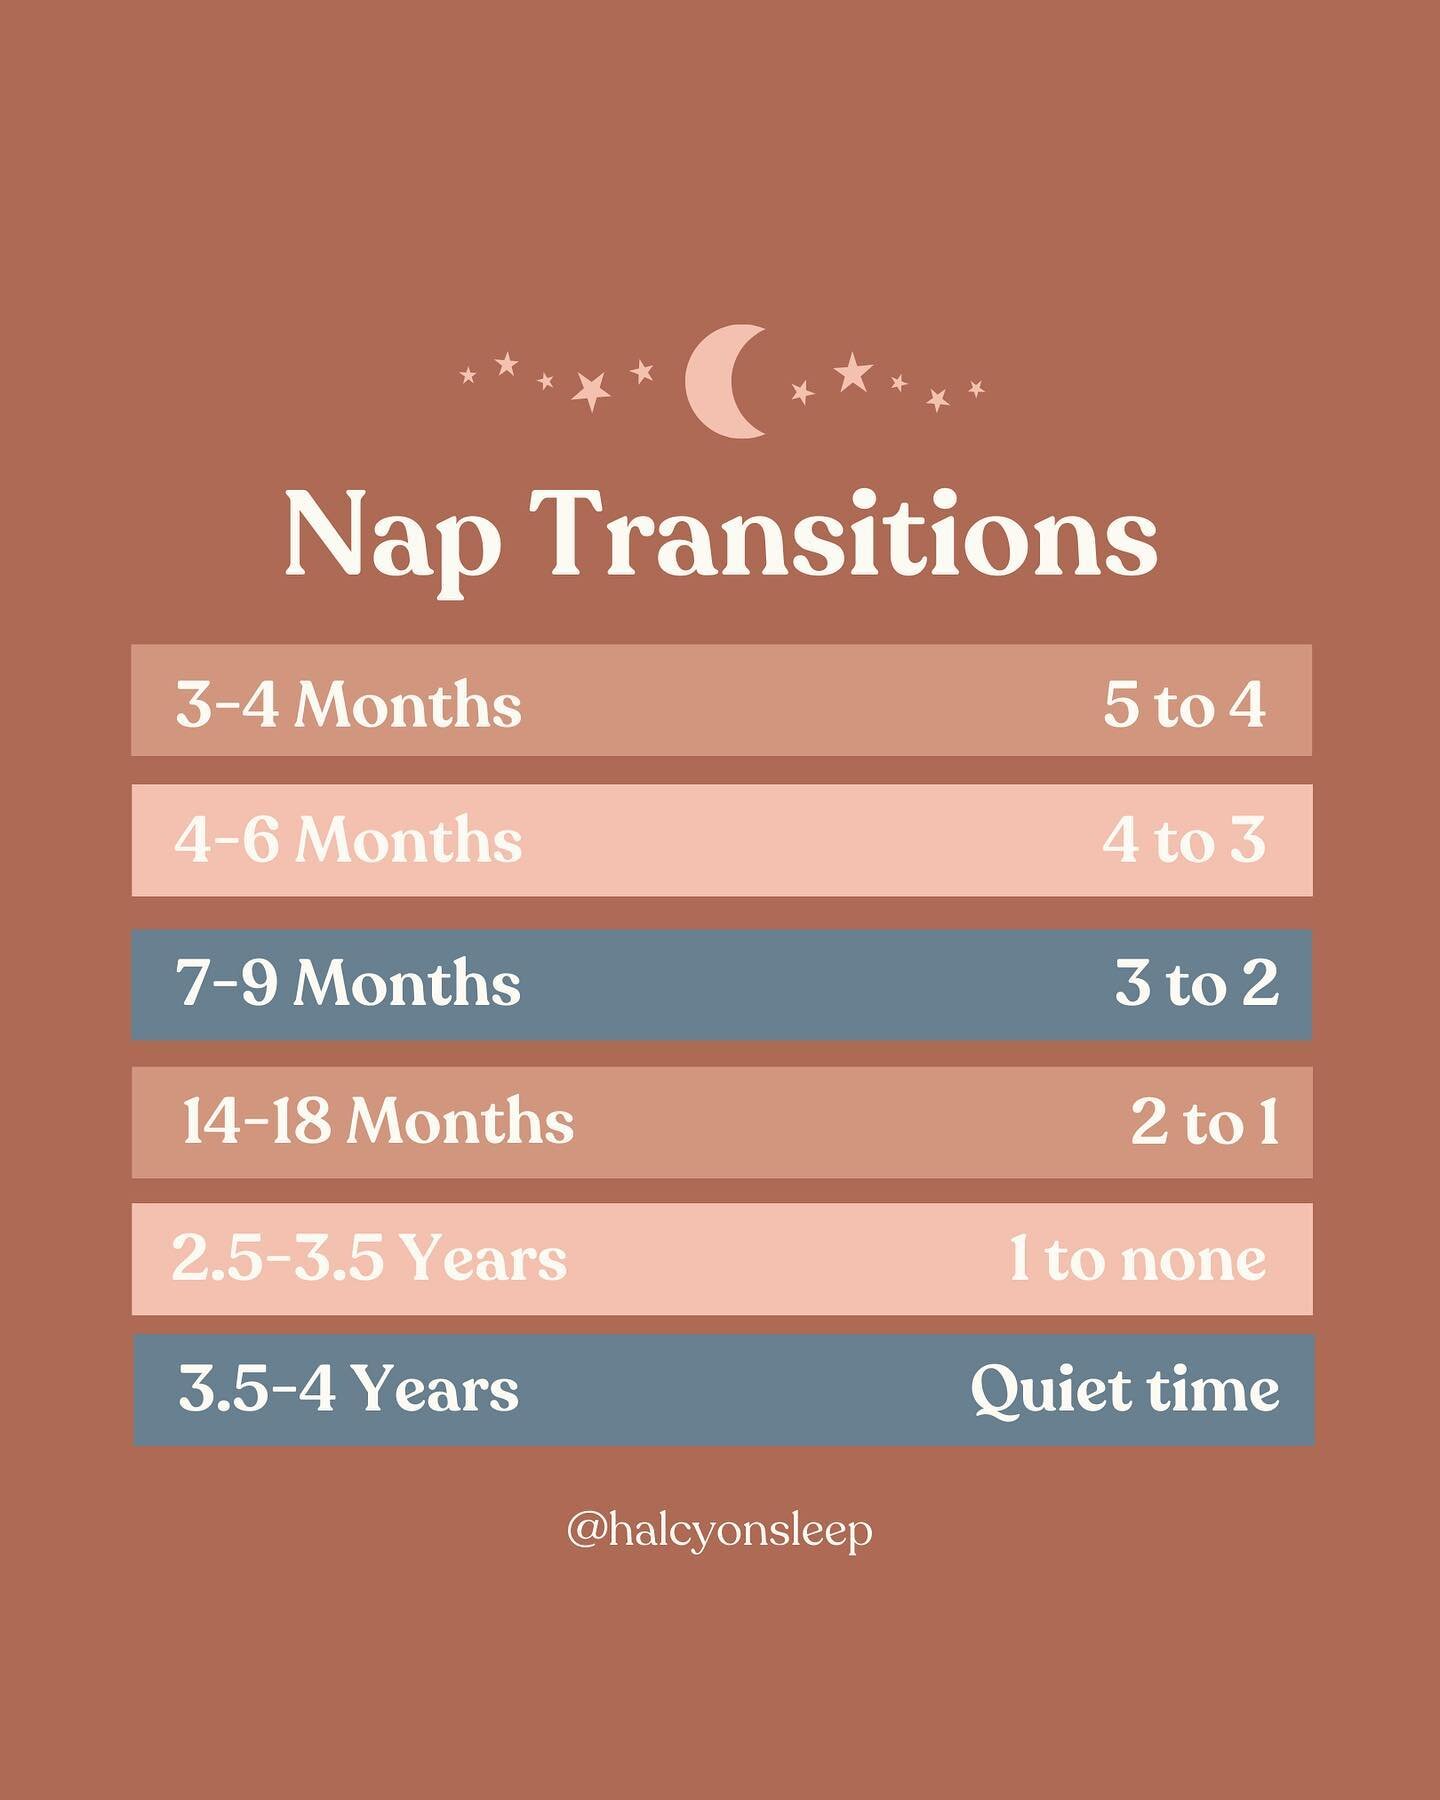 Nap Transitions

The period when your child is transitioning to more awake time can be hard. But knowing how to spot the signs that your little one is ready to drop a nap can really help the process. 

Part of knowing this process is also having a ro